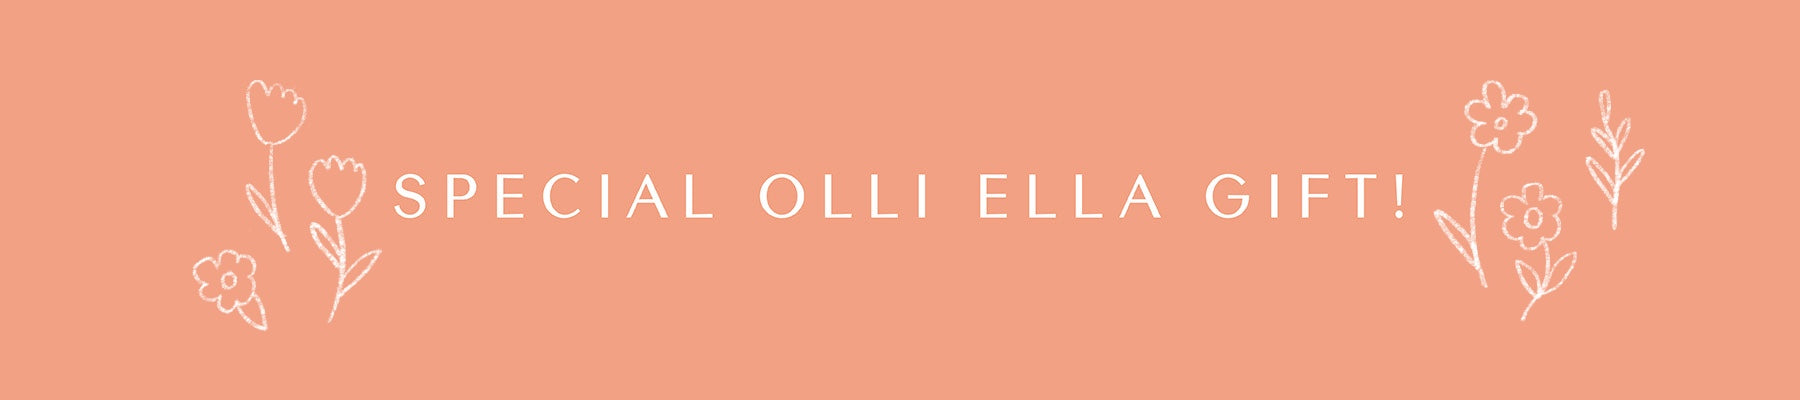 collections/Category_Banner_this_one.jpg - Oliliella